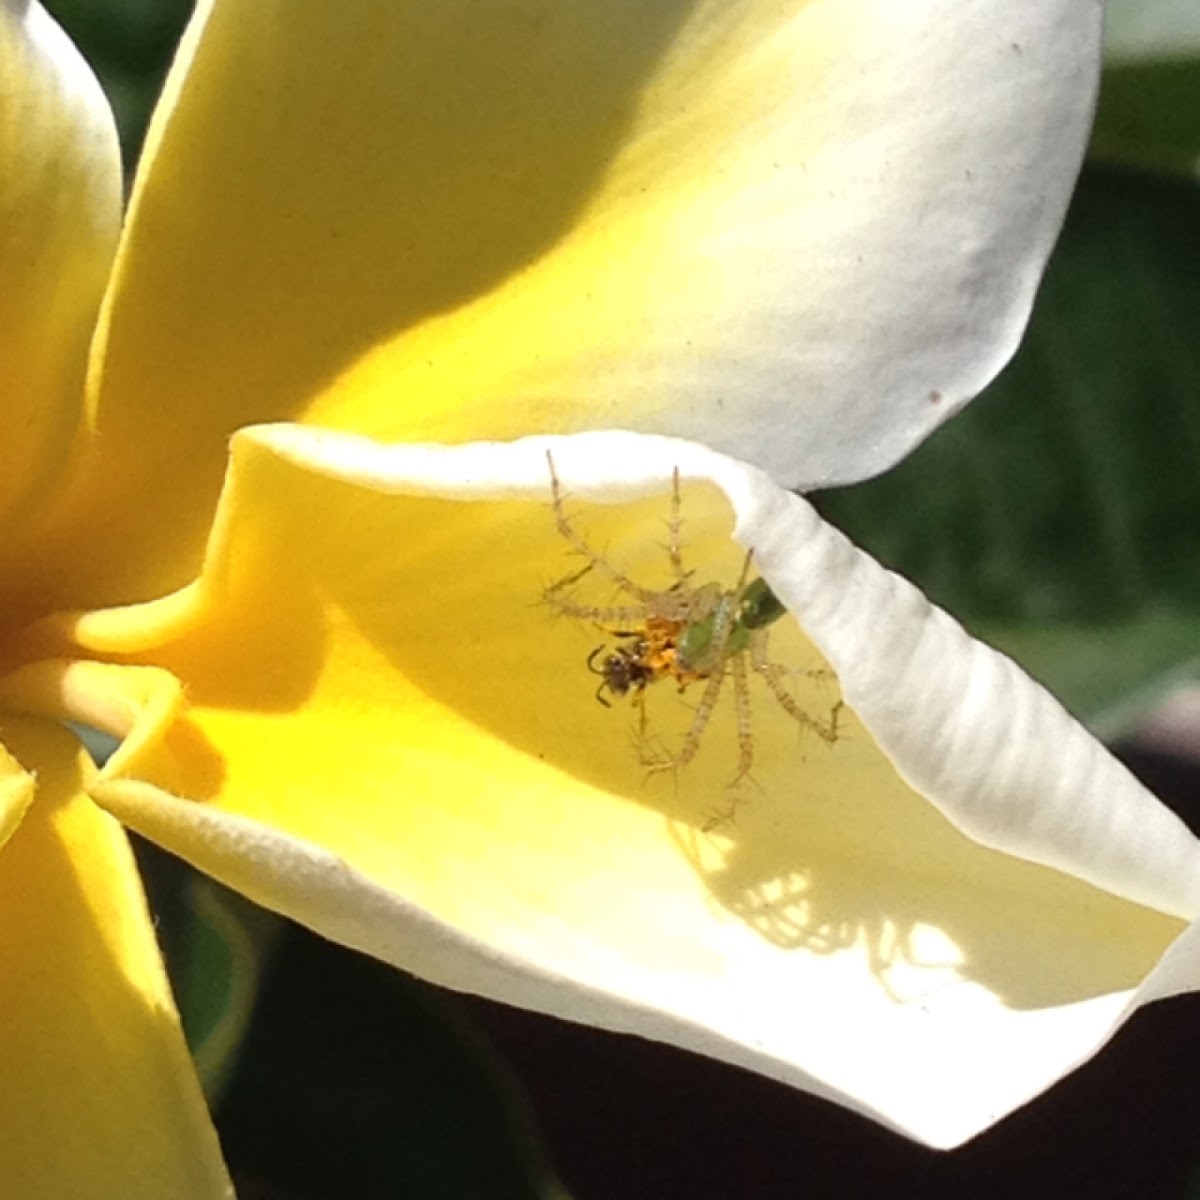 green lynx spider eating a beetle on a plumeria